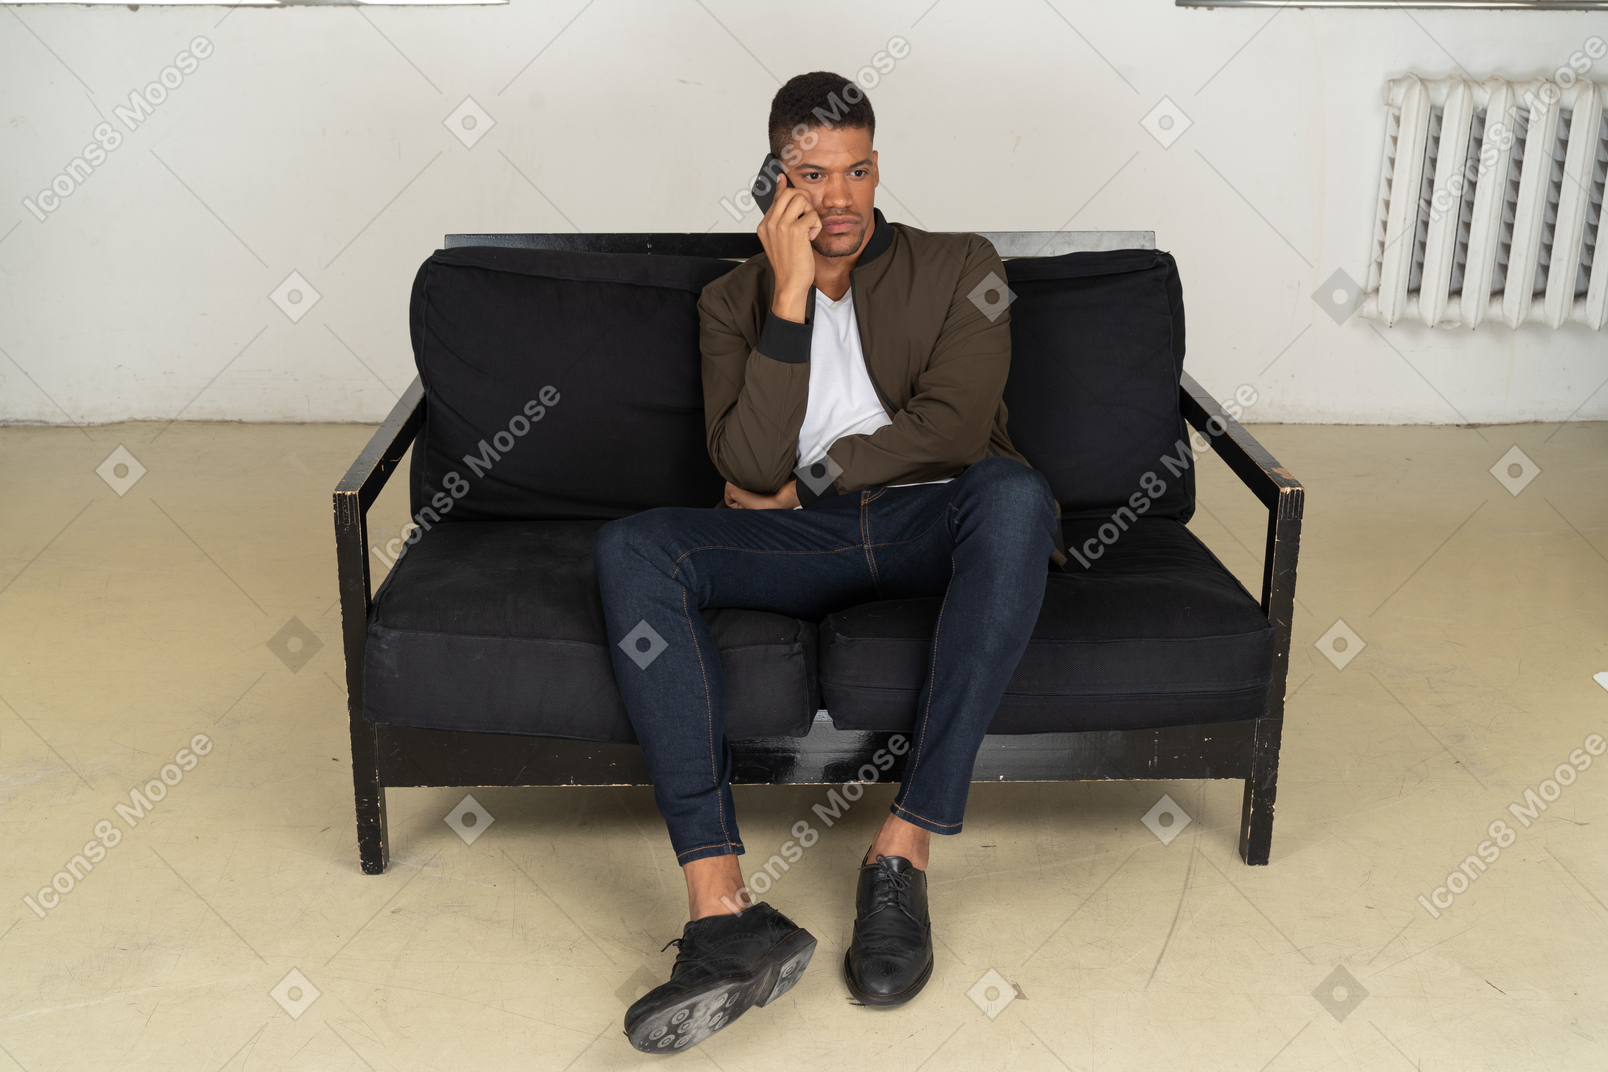 Front view of a perplexed young man sitting on a sofa and talking on his phone